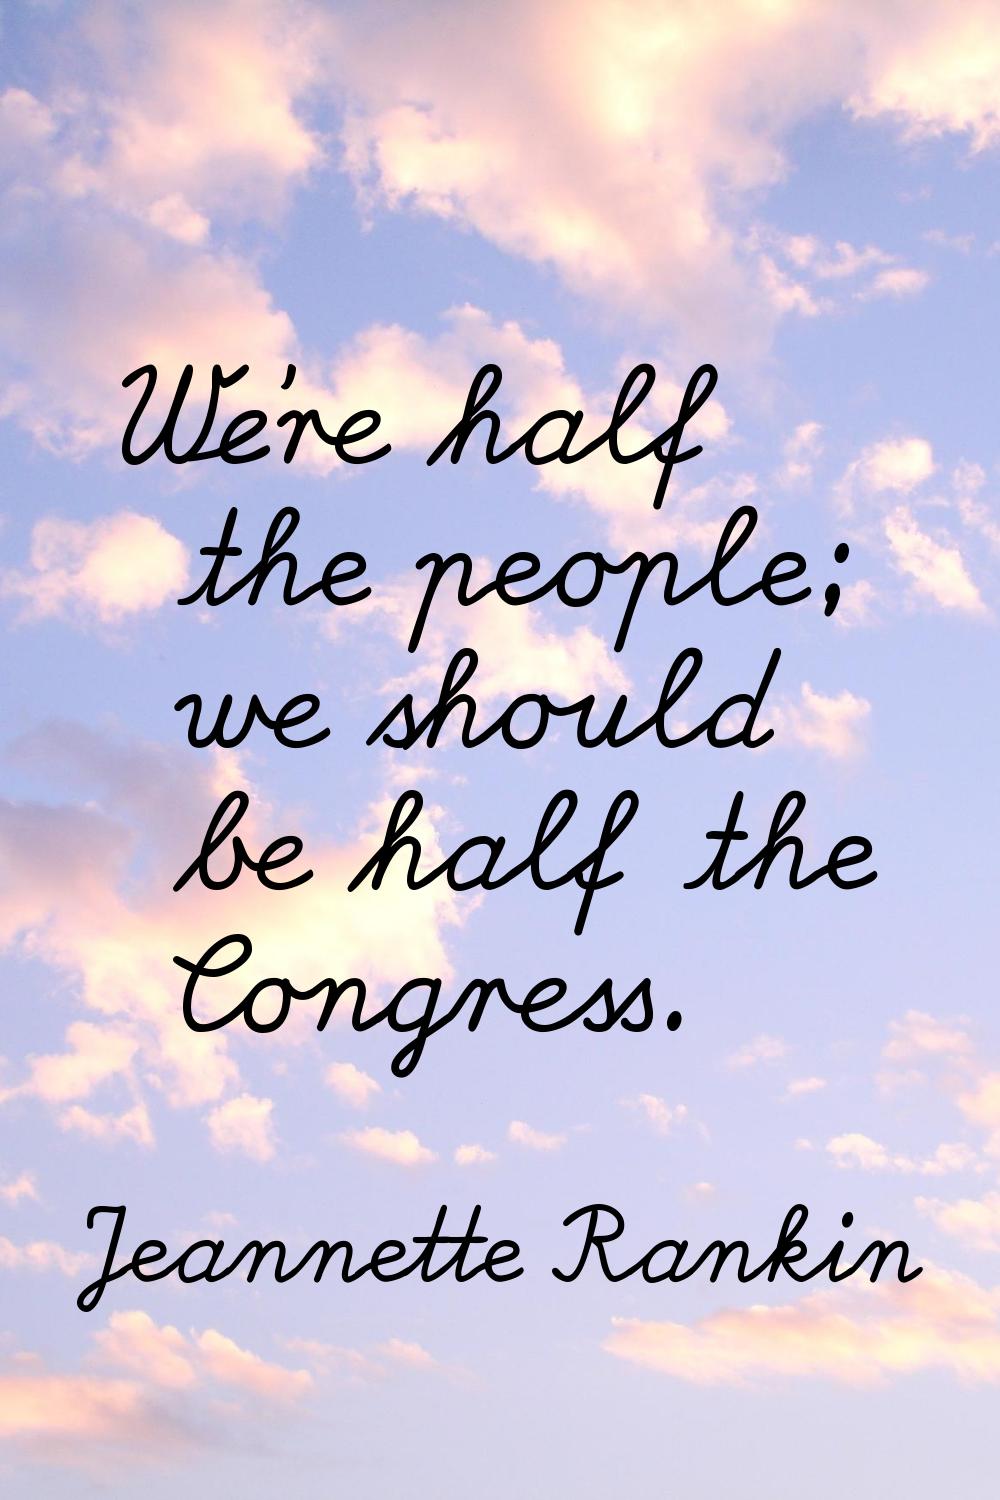 We're half the people; we should be half the Congress.